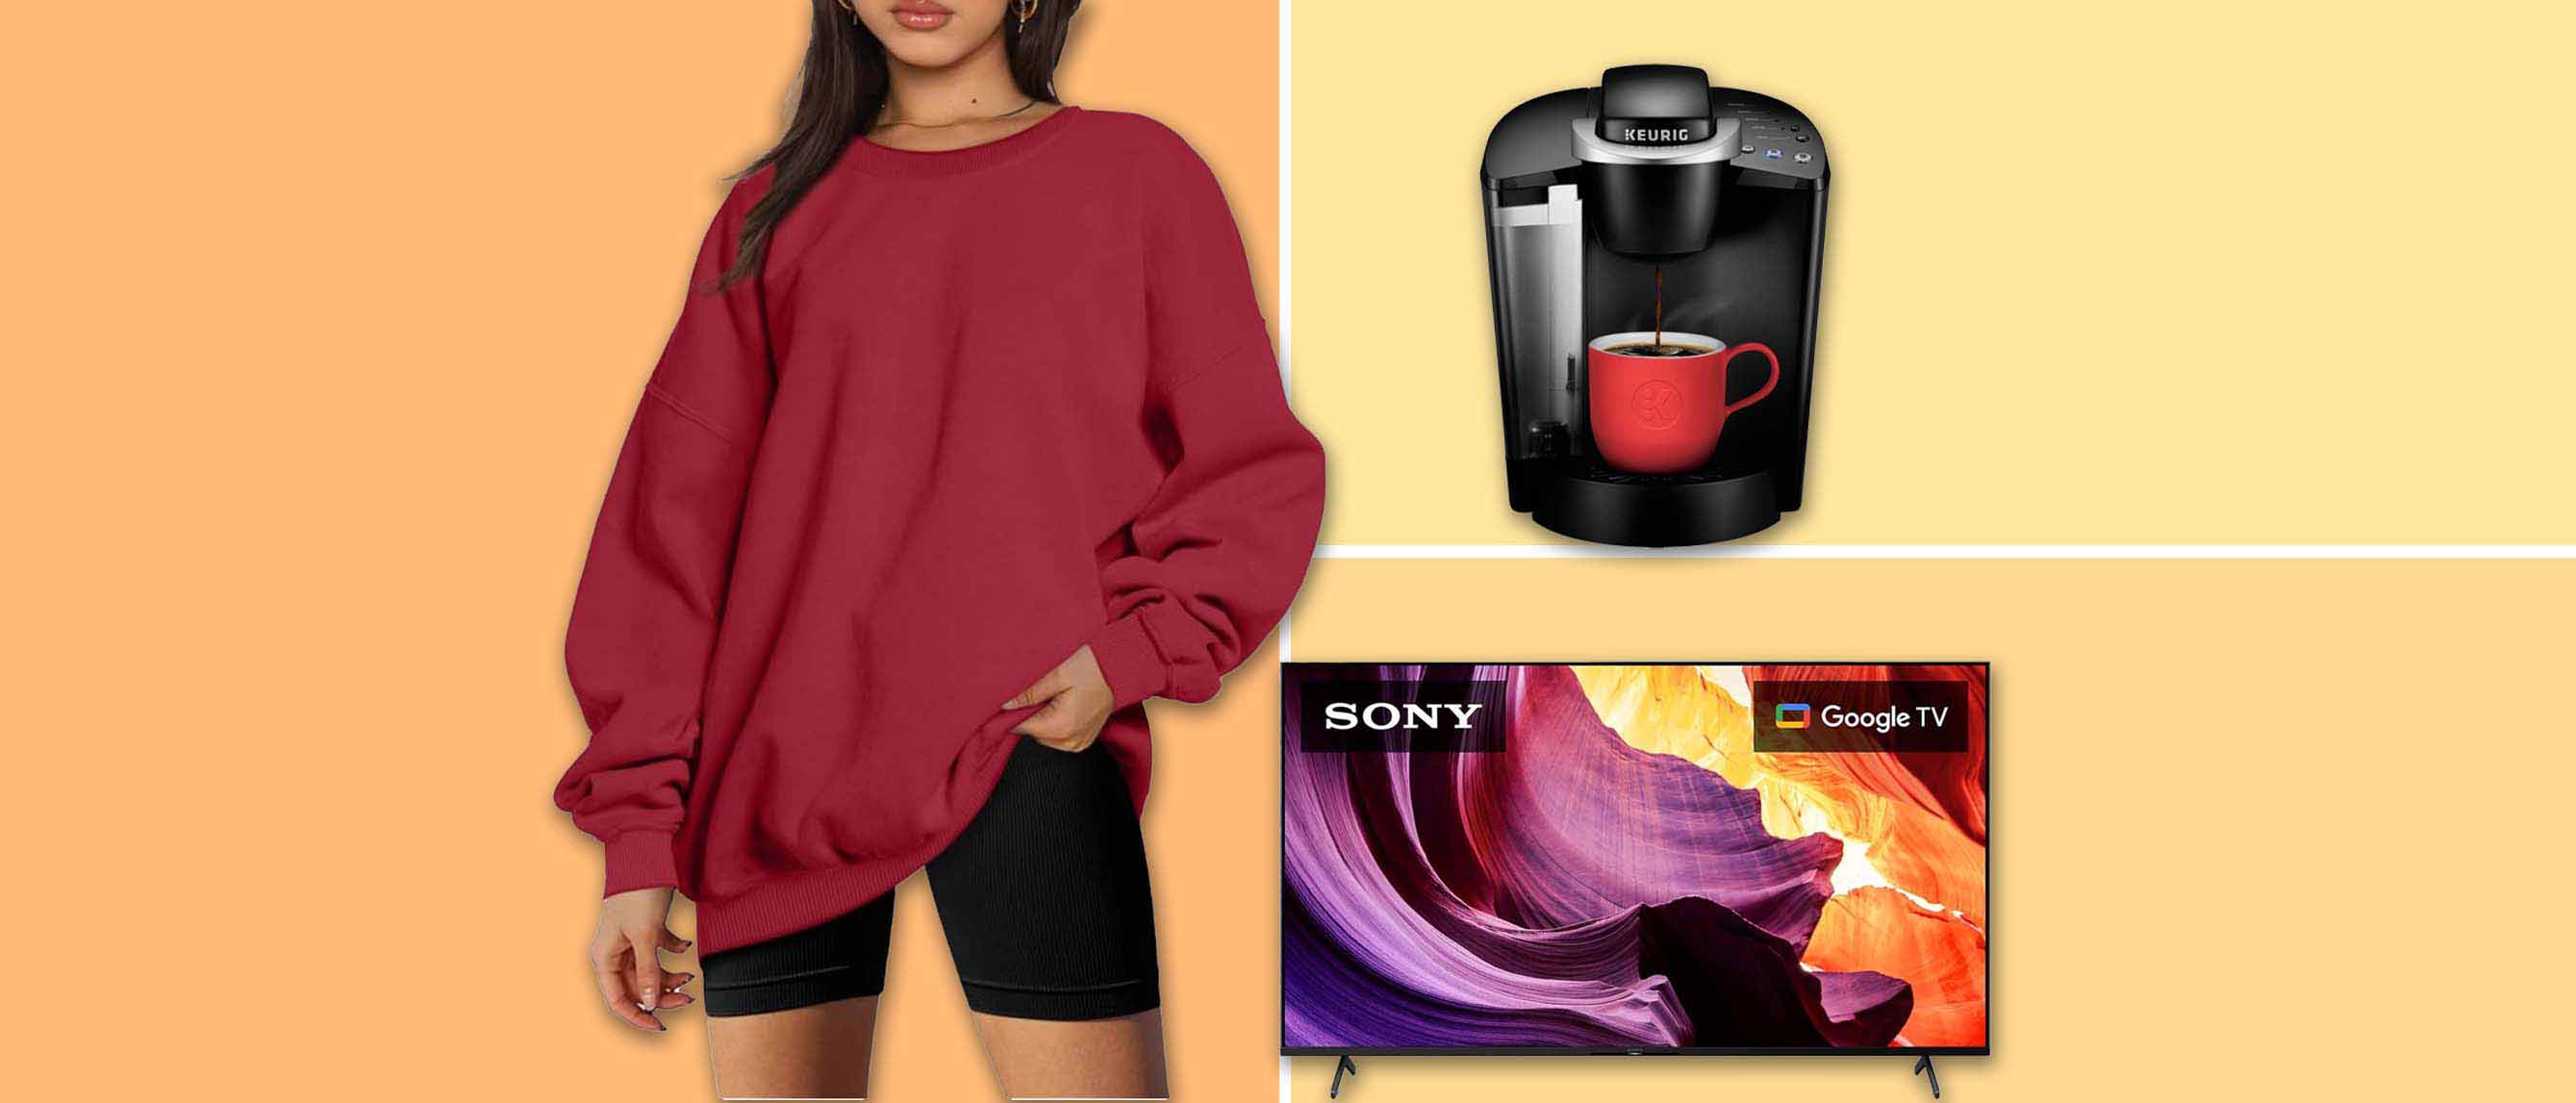 Image of woman in sweatshirt, coffee maker and Sony TV